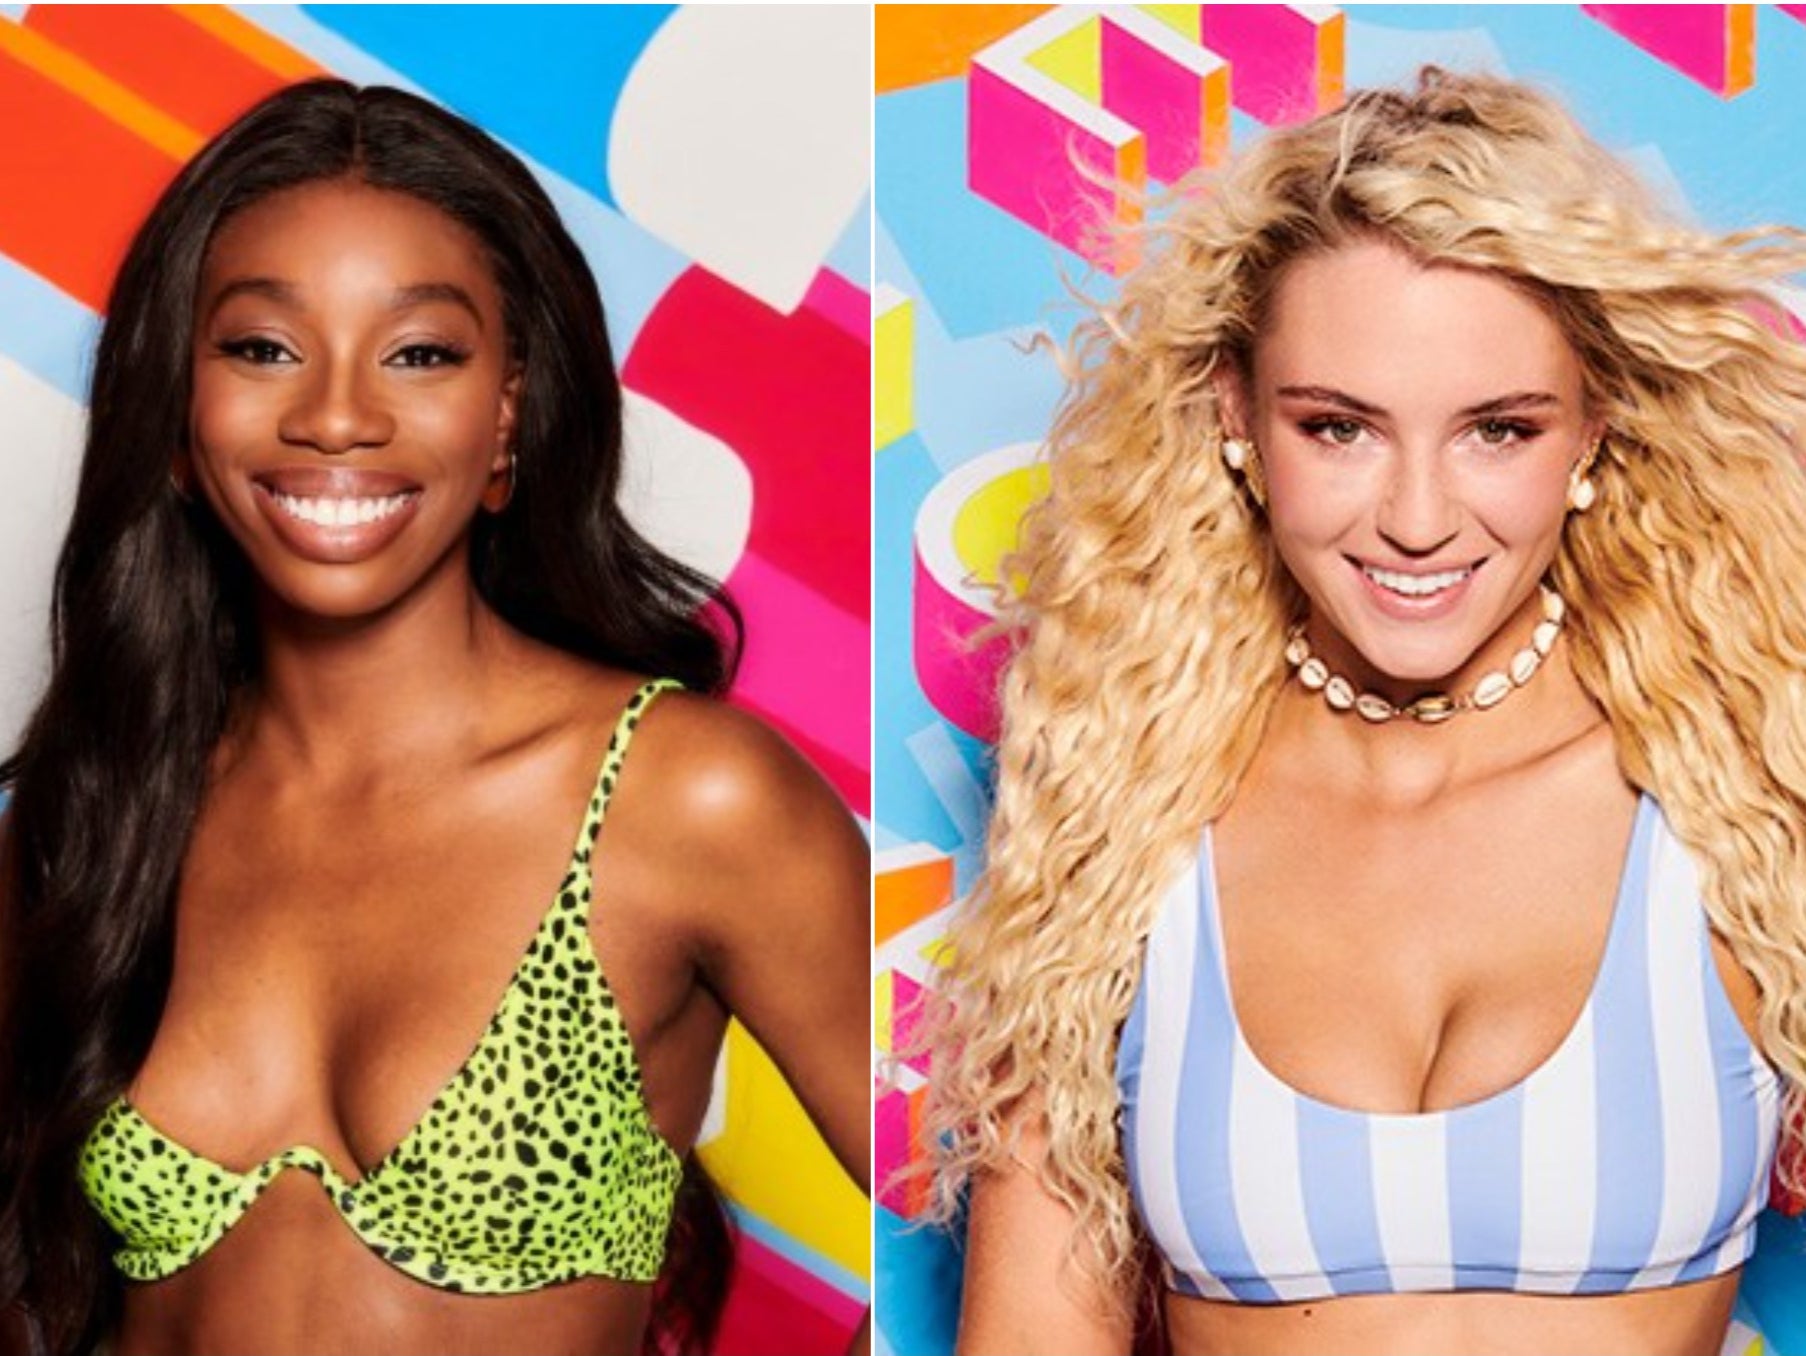 Yewande Biala (left) has responded after her fellow former Love Island contestant Lucie Donlan appeared to accuse Biala of bullying her during the show